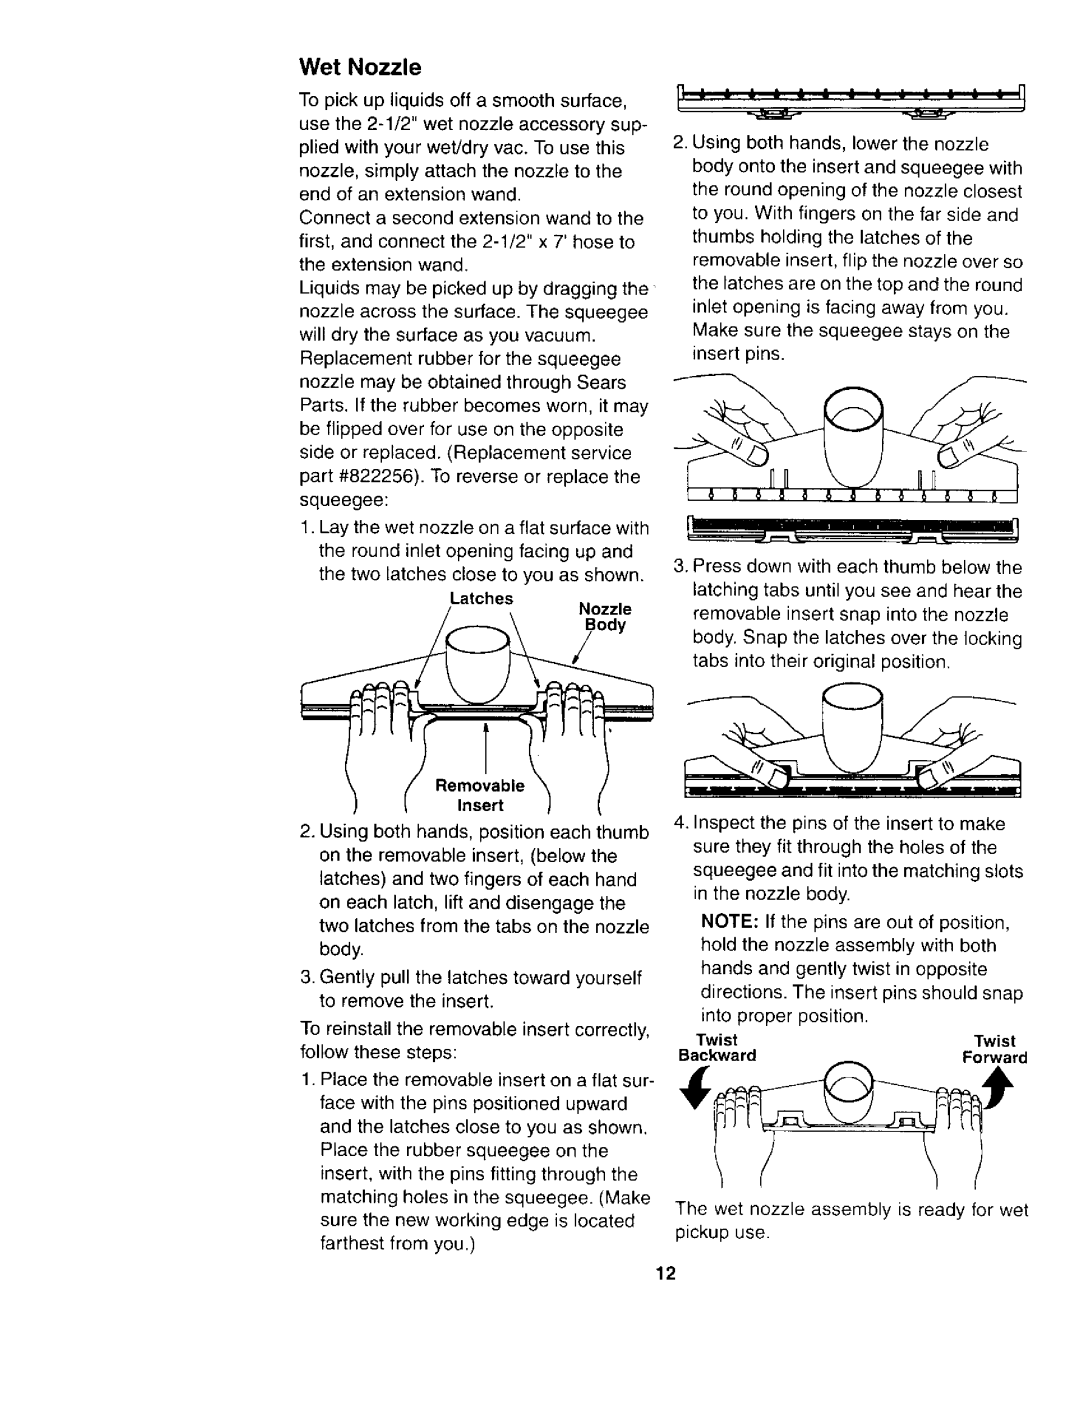 Sears 113.177035 owner manual Wet Nozzle, Removable Insert 